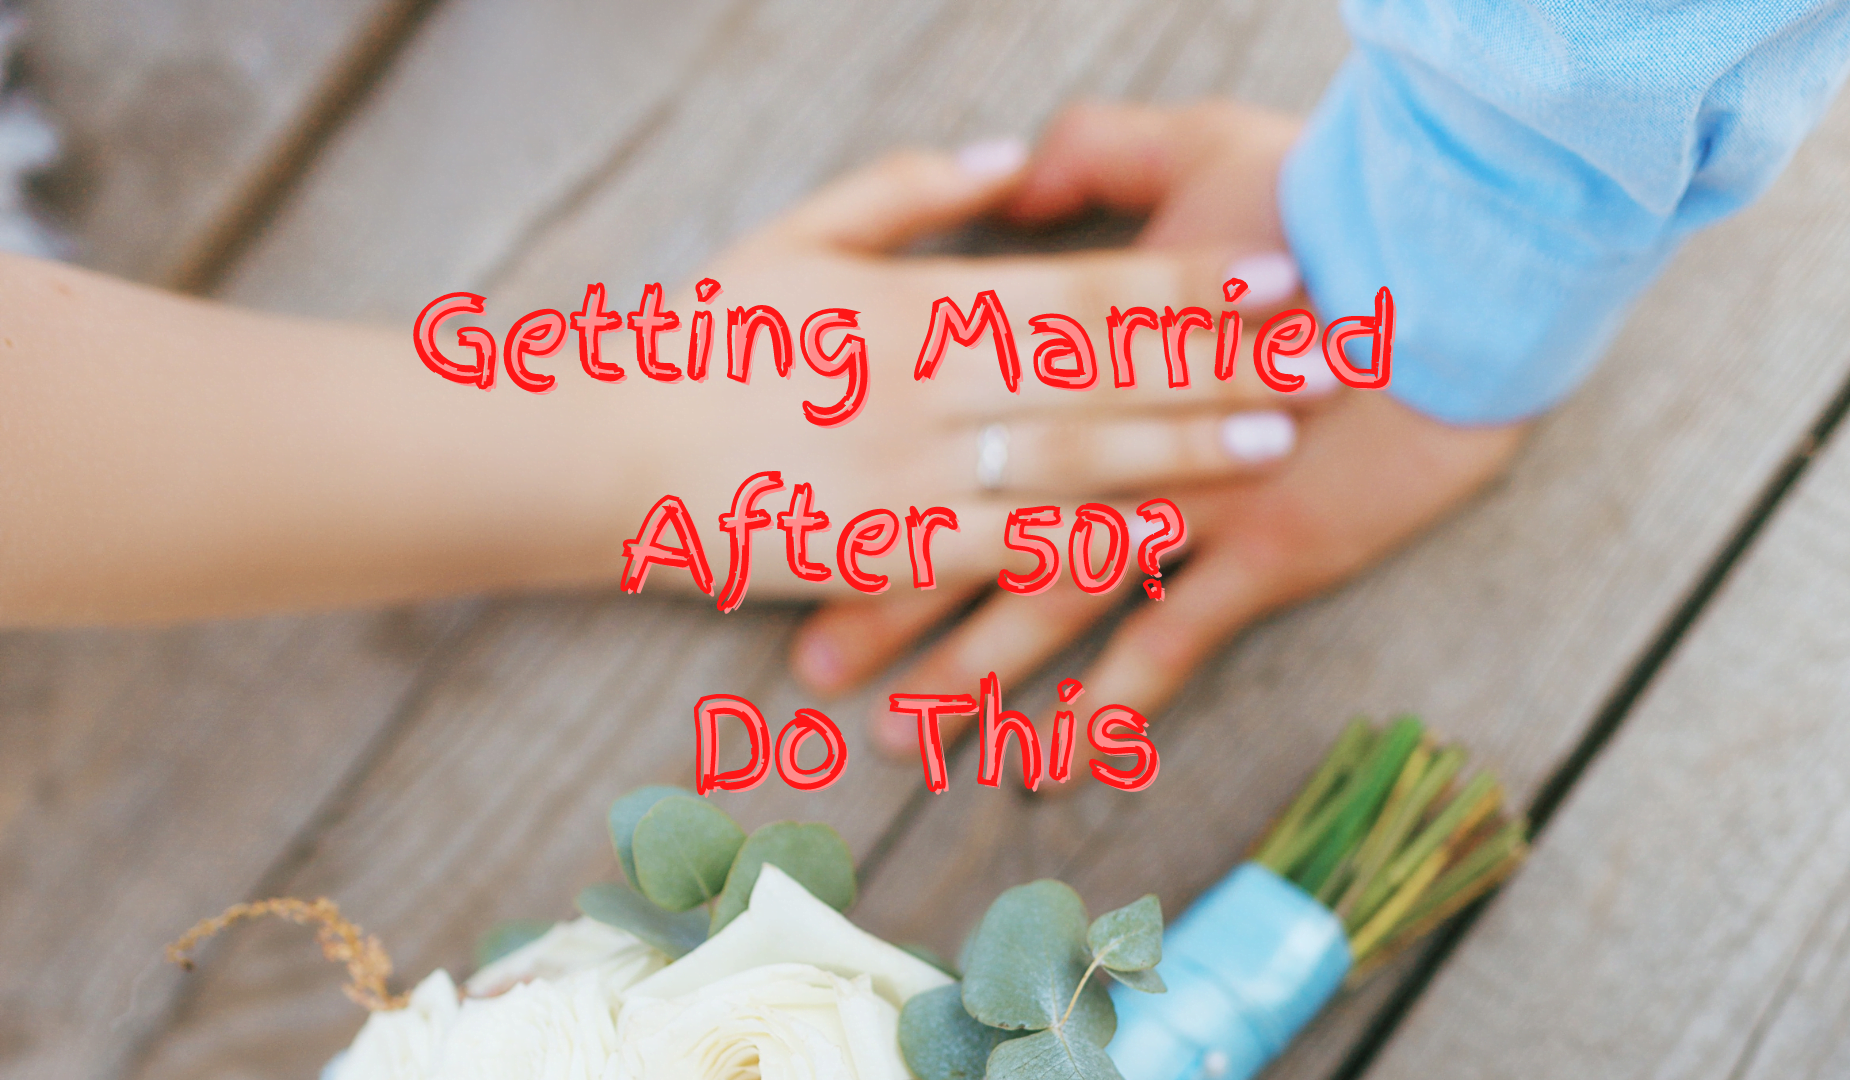 Getting Married After 50? Do This